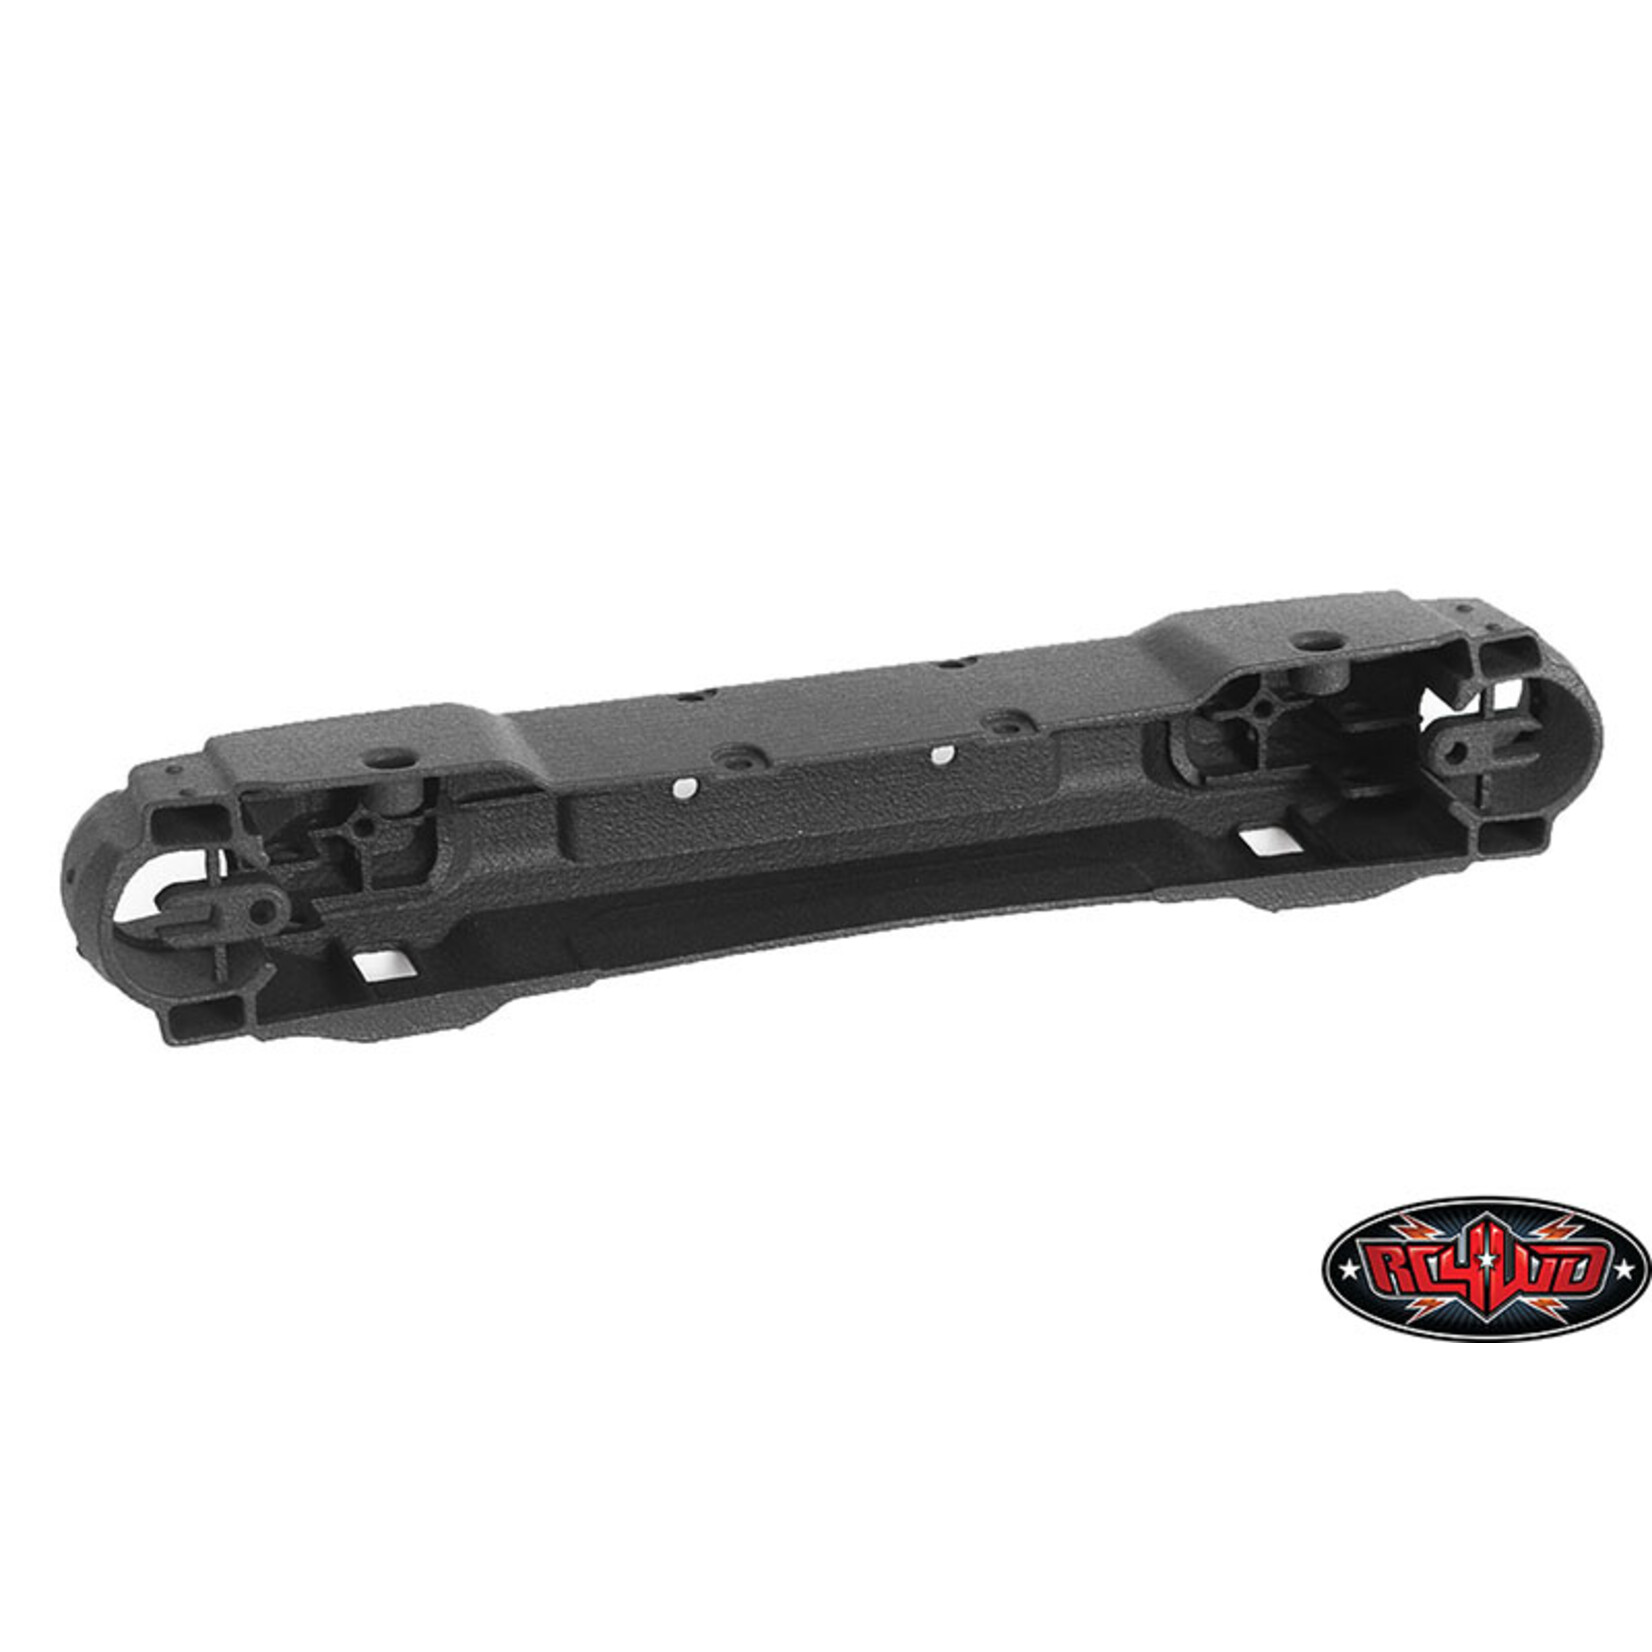 CCHAND RC4WD CChand Axial SCX10 III OEM Front Bumper w/License Plate Holder (Gladiator/Wrangler) #VVV-C1099